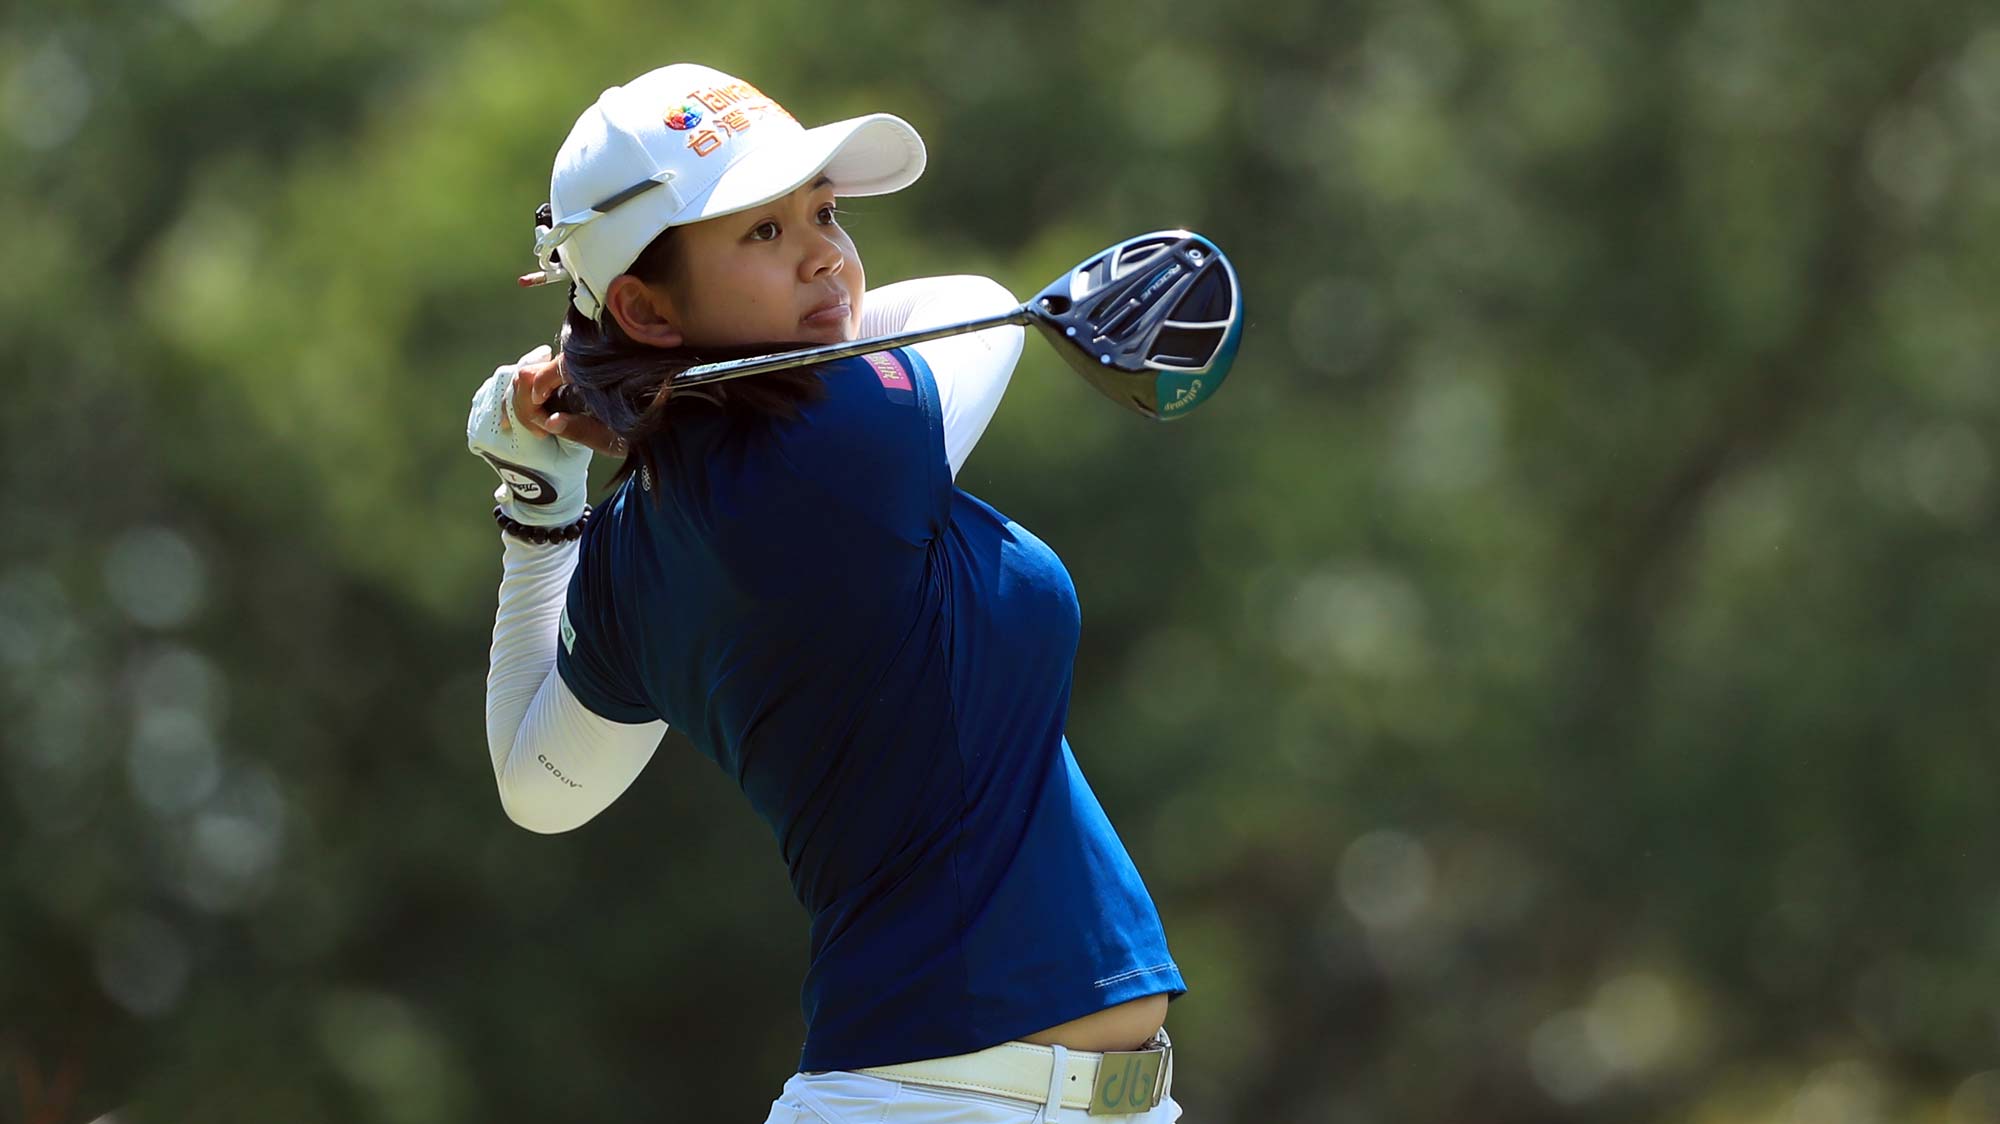 Wei-Ling Hsu of Chinese Taipei hits her tee shot on the third hole during the final round of the Pure Silk Championshipv